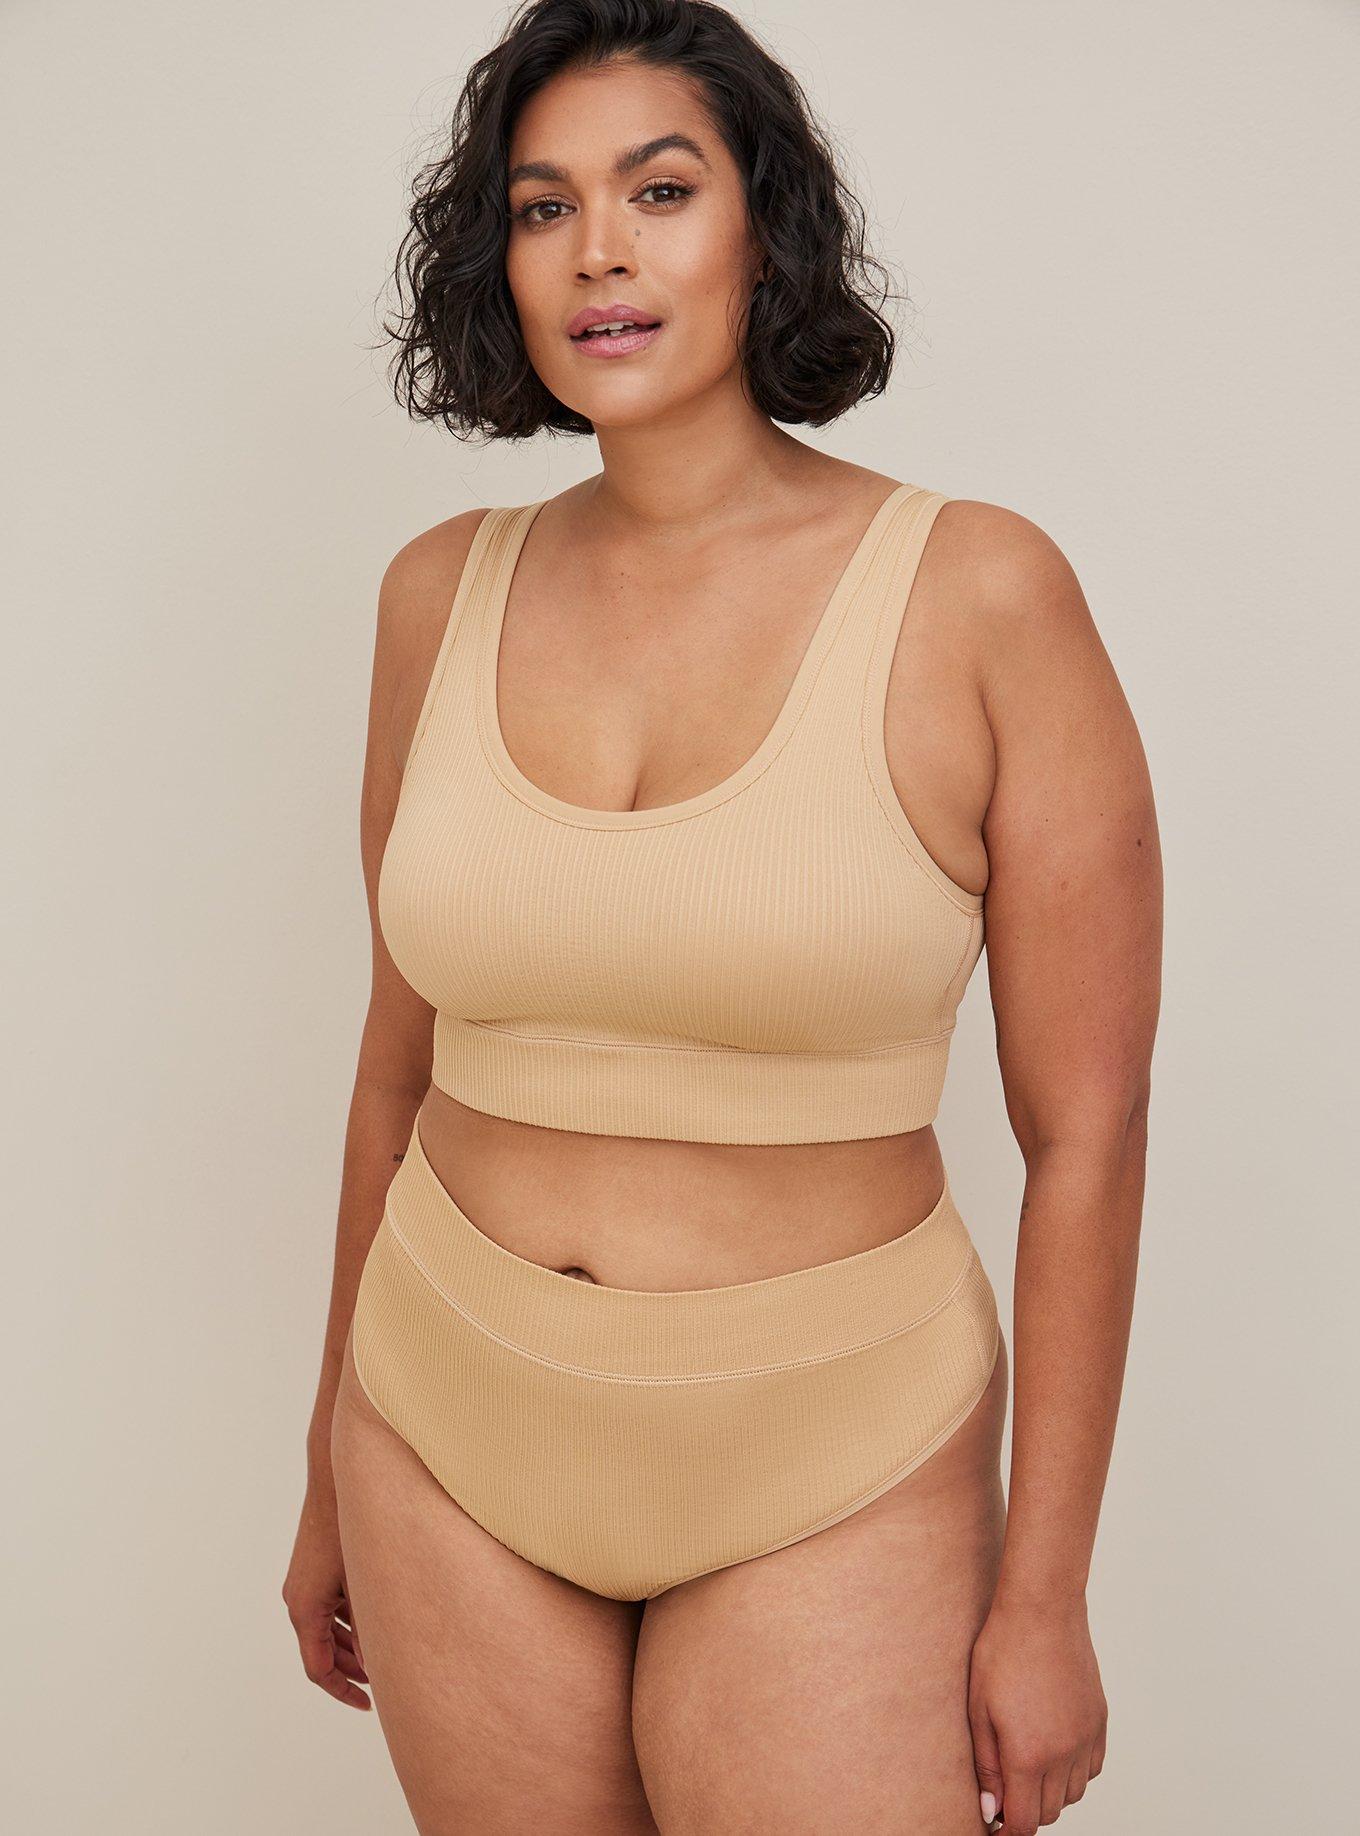 AnyBody~(1) Rib Knit Seamless Wirefree Bra with Removable Pads